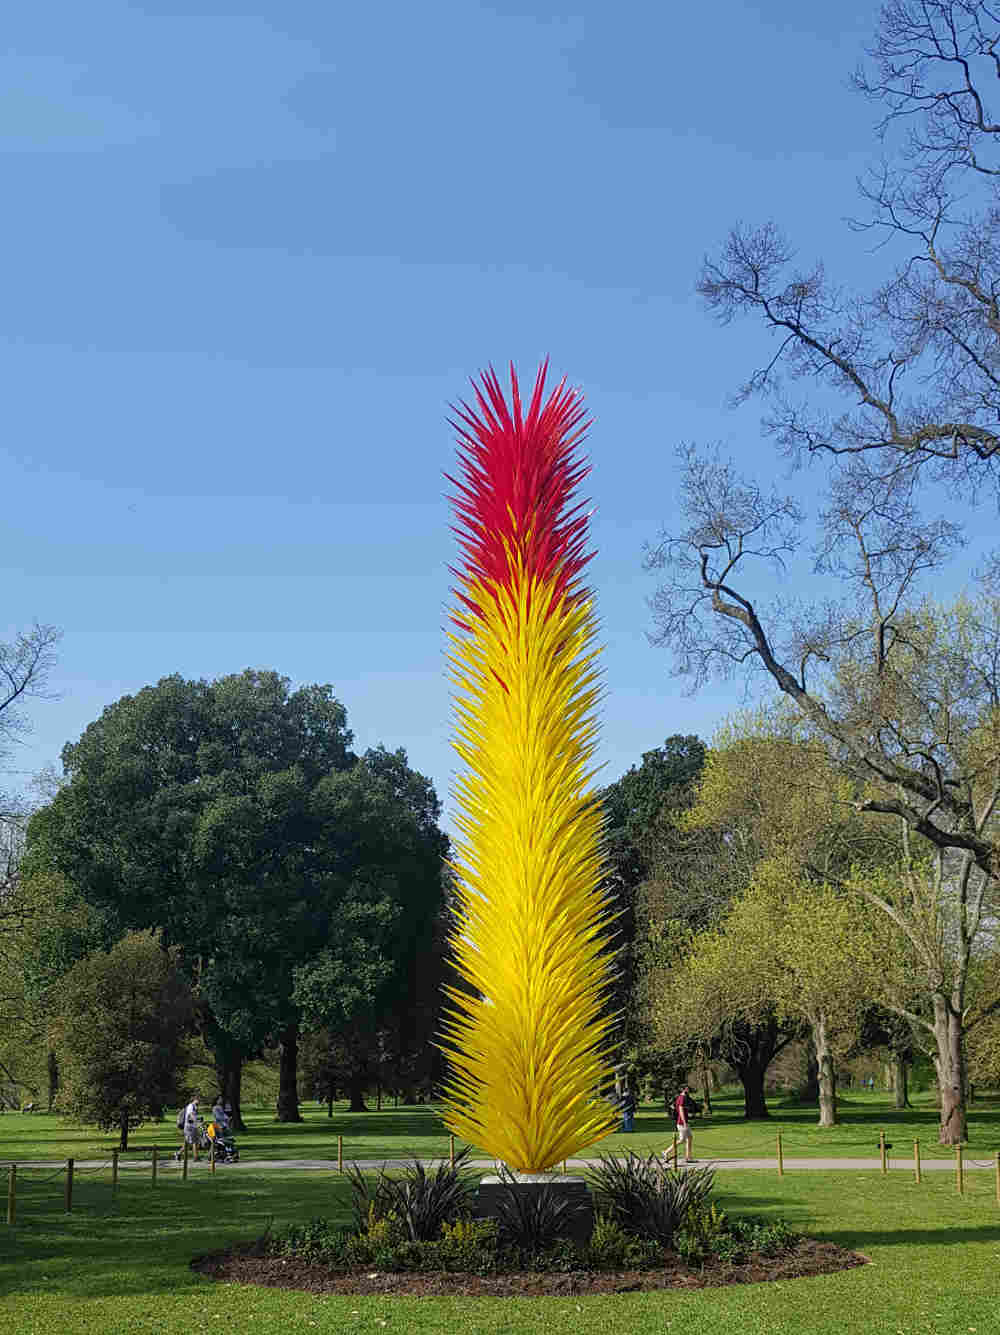 Dale Chihuly, Kew, Scarlet and Yellow Icicle Tower